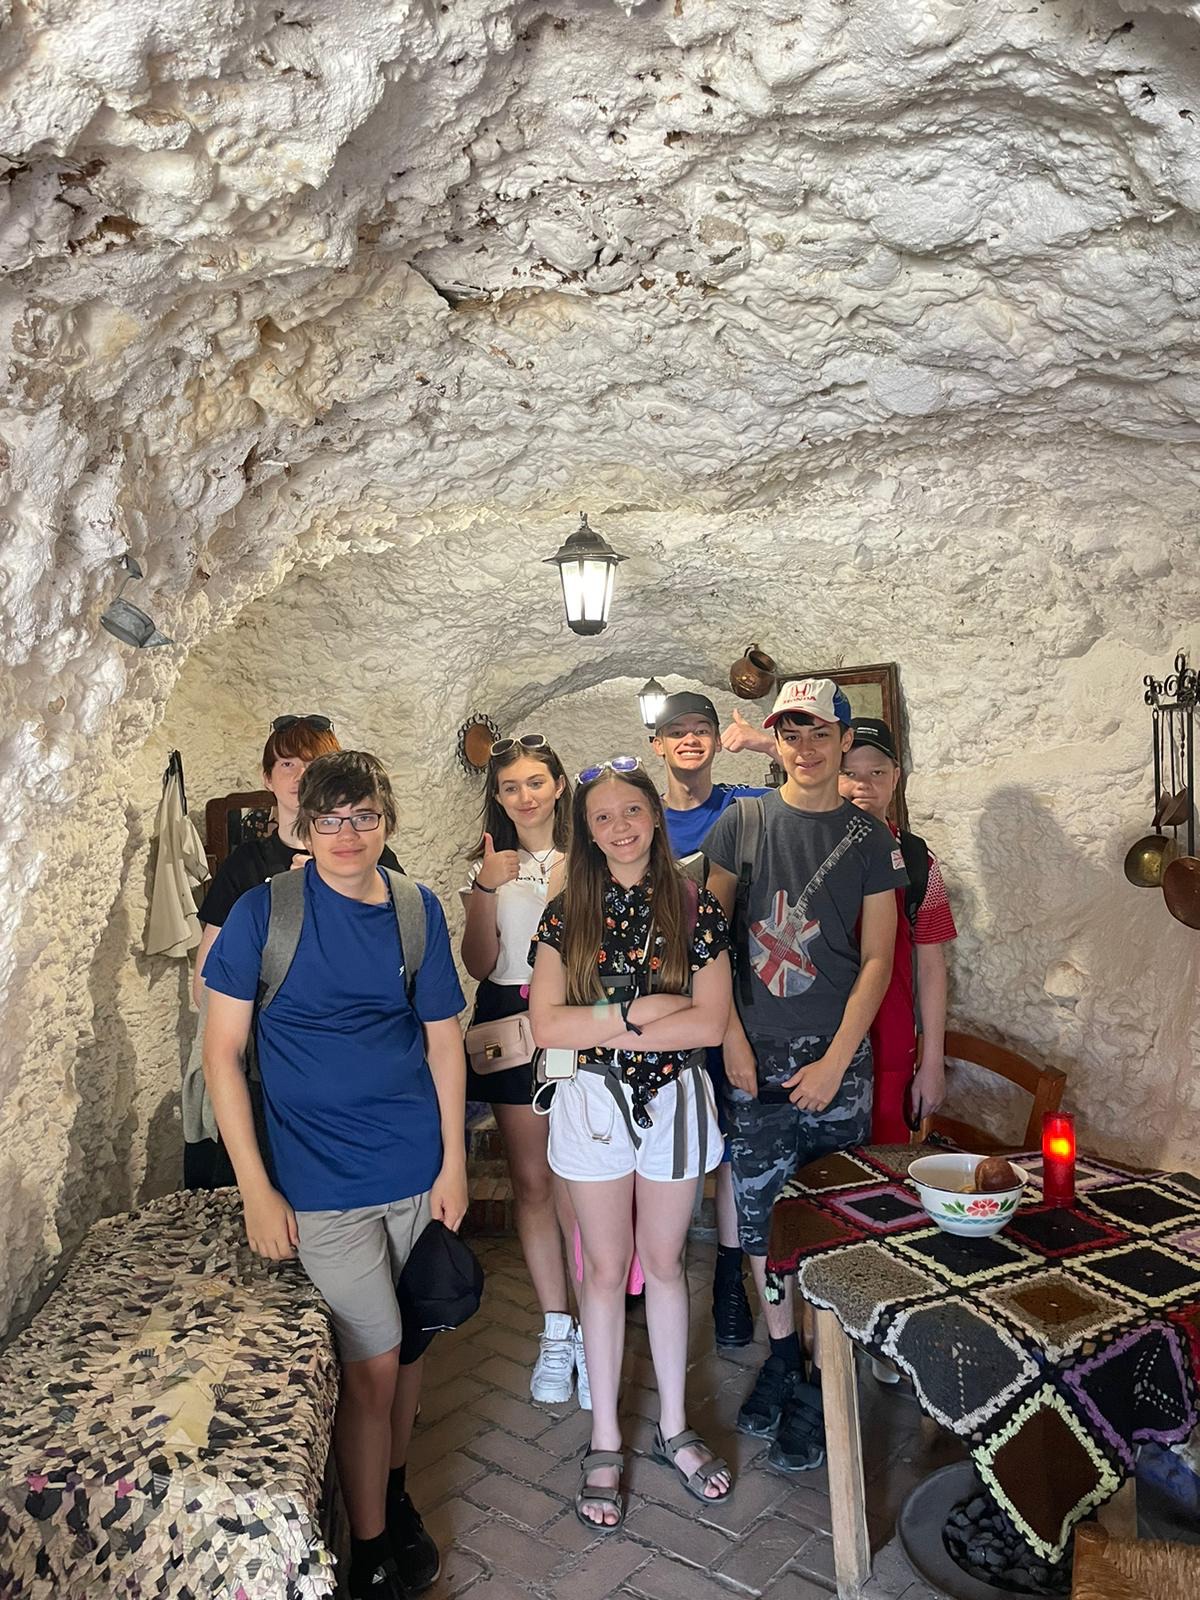 Learning about the history of the gypsy people who lived in cave houses.